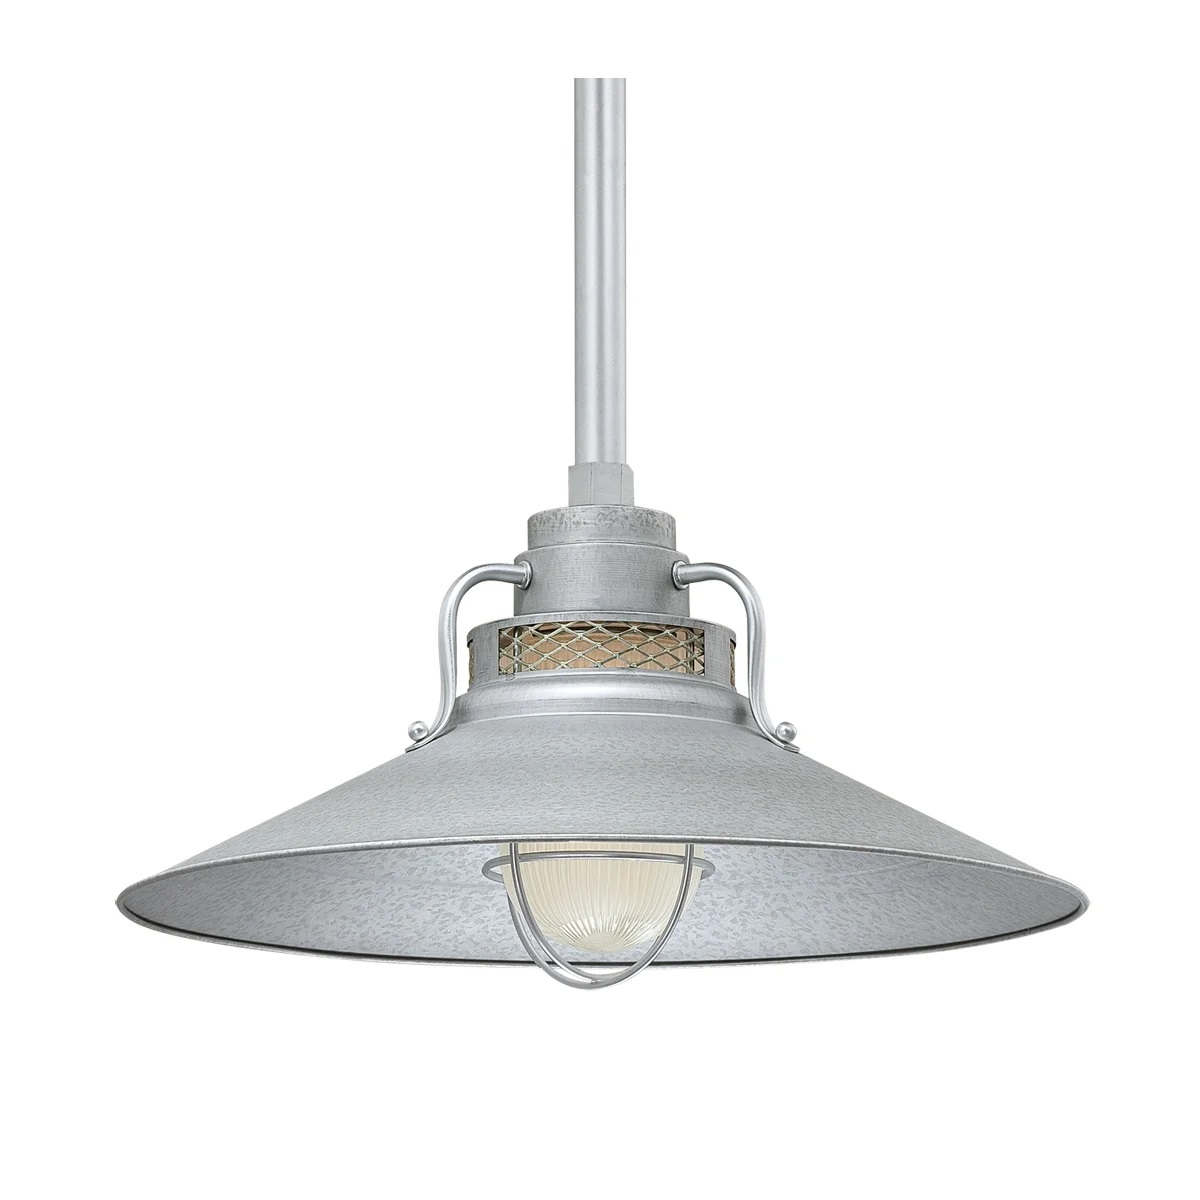 Galvanized Railroad Style Shade with Ceiling Stem Mount